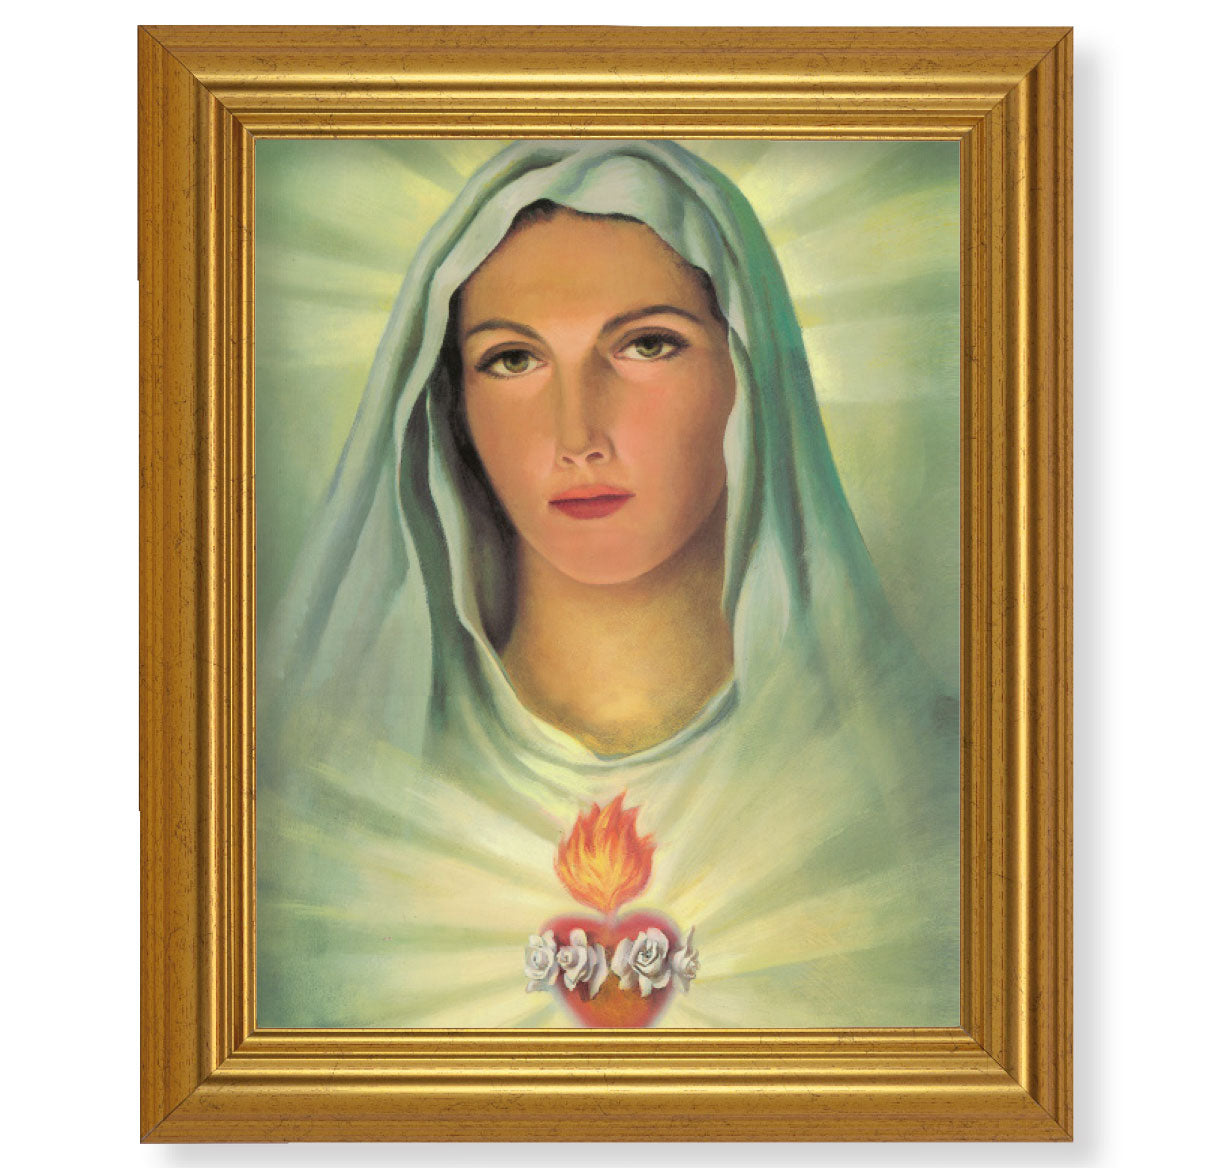 Immaculate Heart of Mary Picture Framed Wall Art Decor, Large, Antique Gold-Leaf Classic Frame